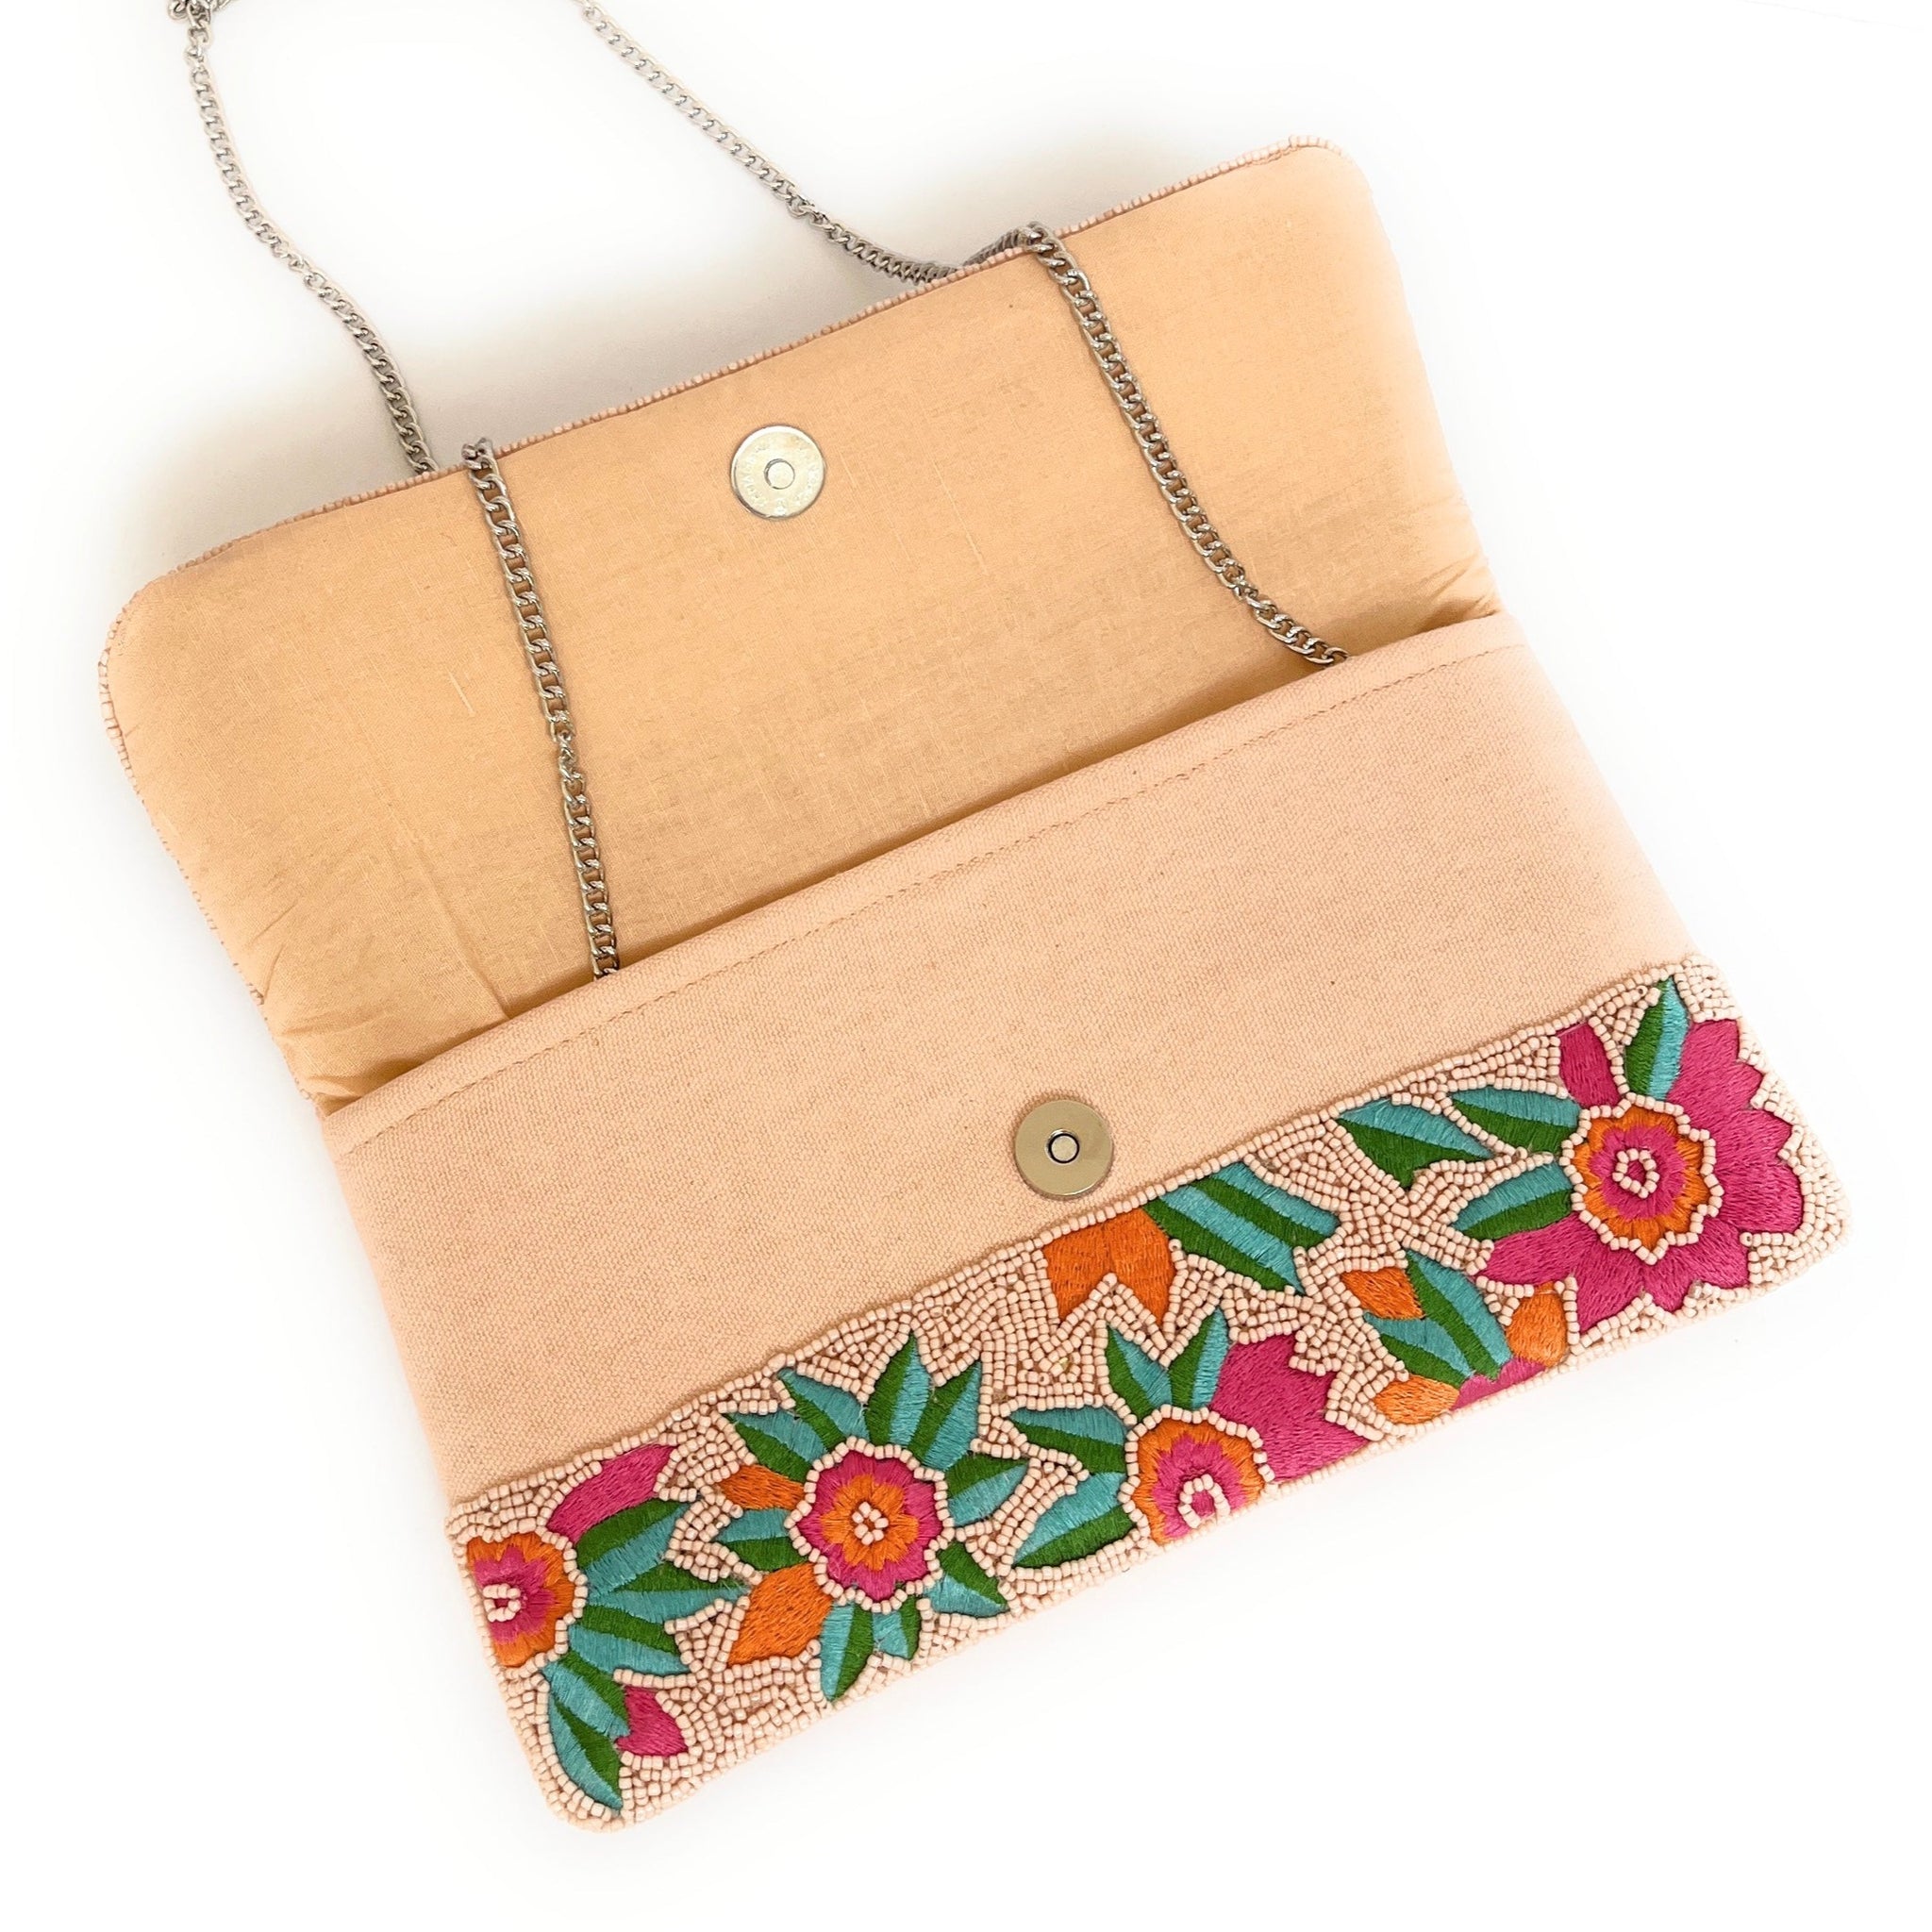 Tropical Floral Beaded Clutch, Seed Bead Clutch Bag, Beaded Clutch for Women